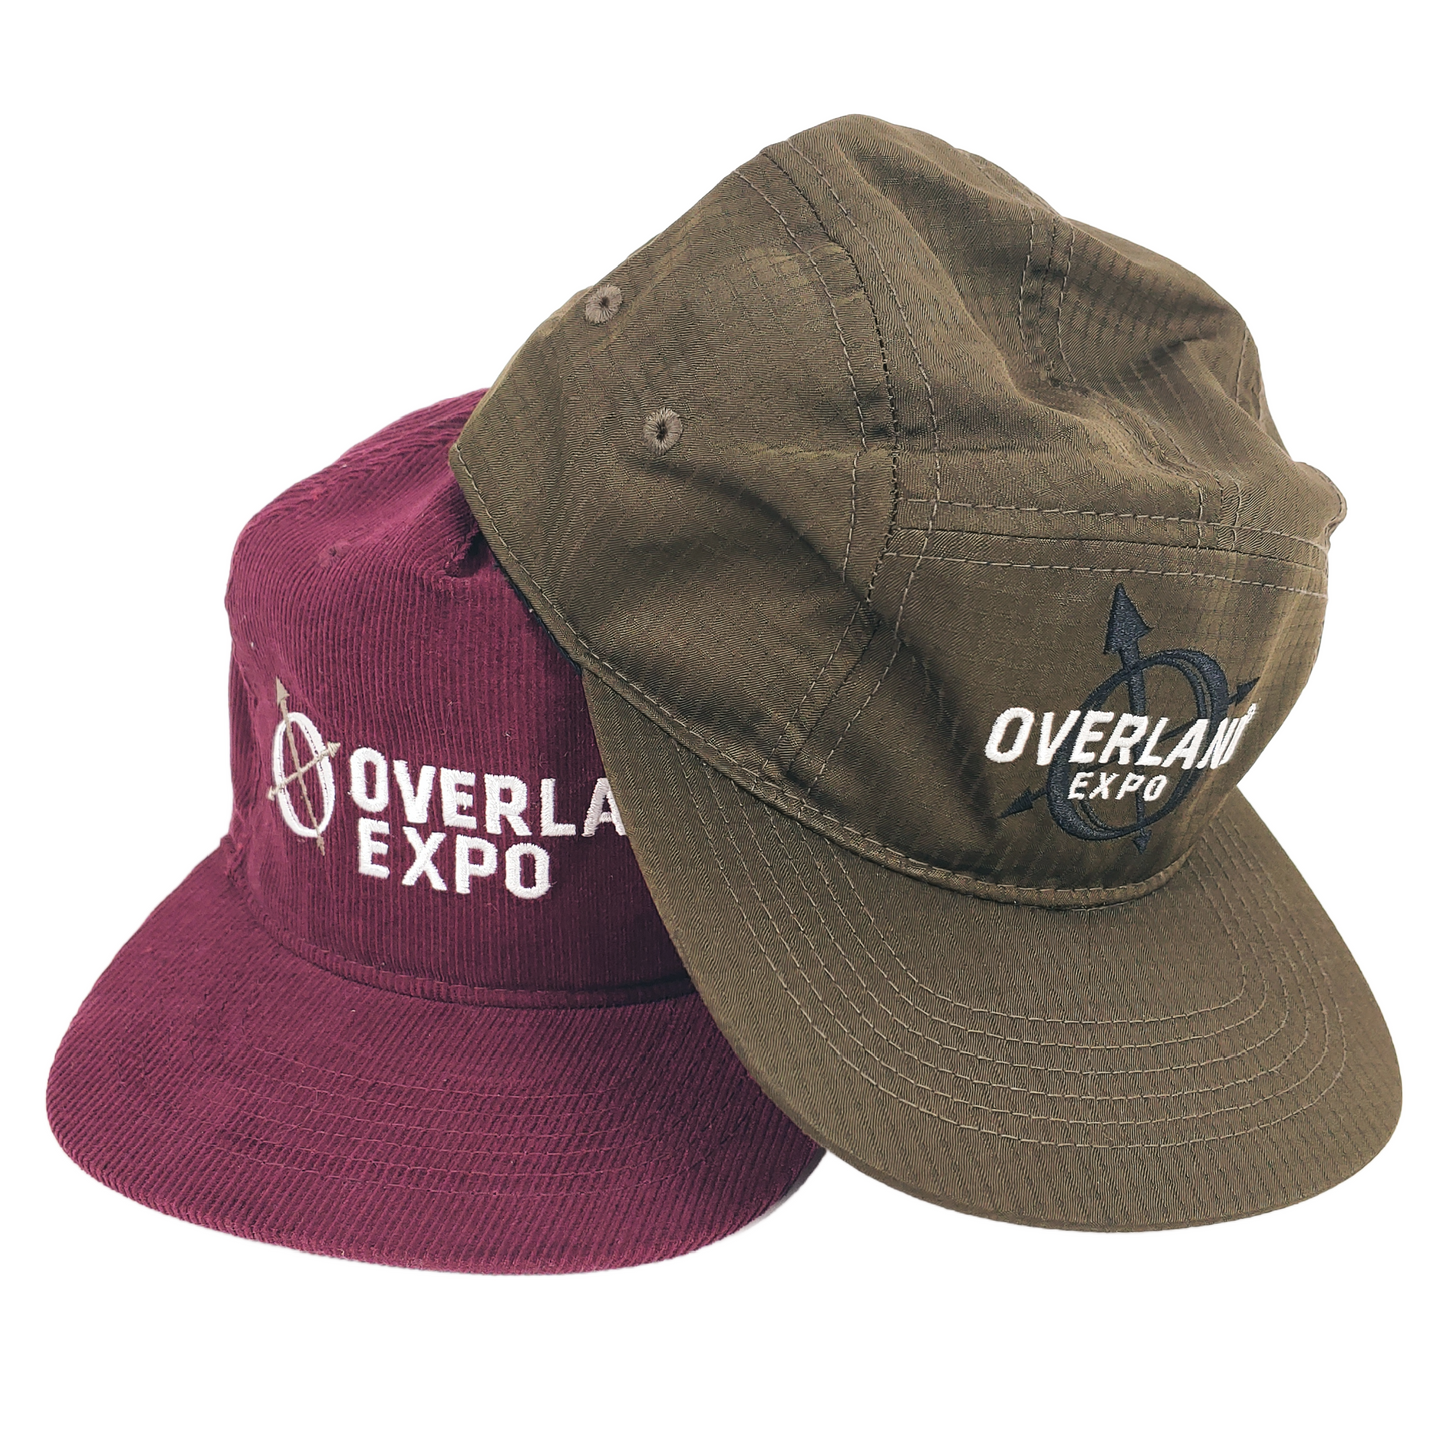 Overland Expo - Embroidered Corduroy Maroon - Flat Billed Hat